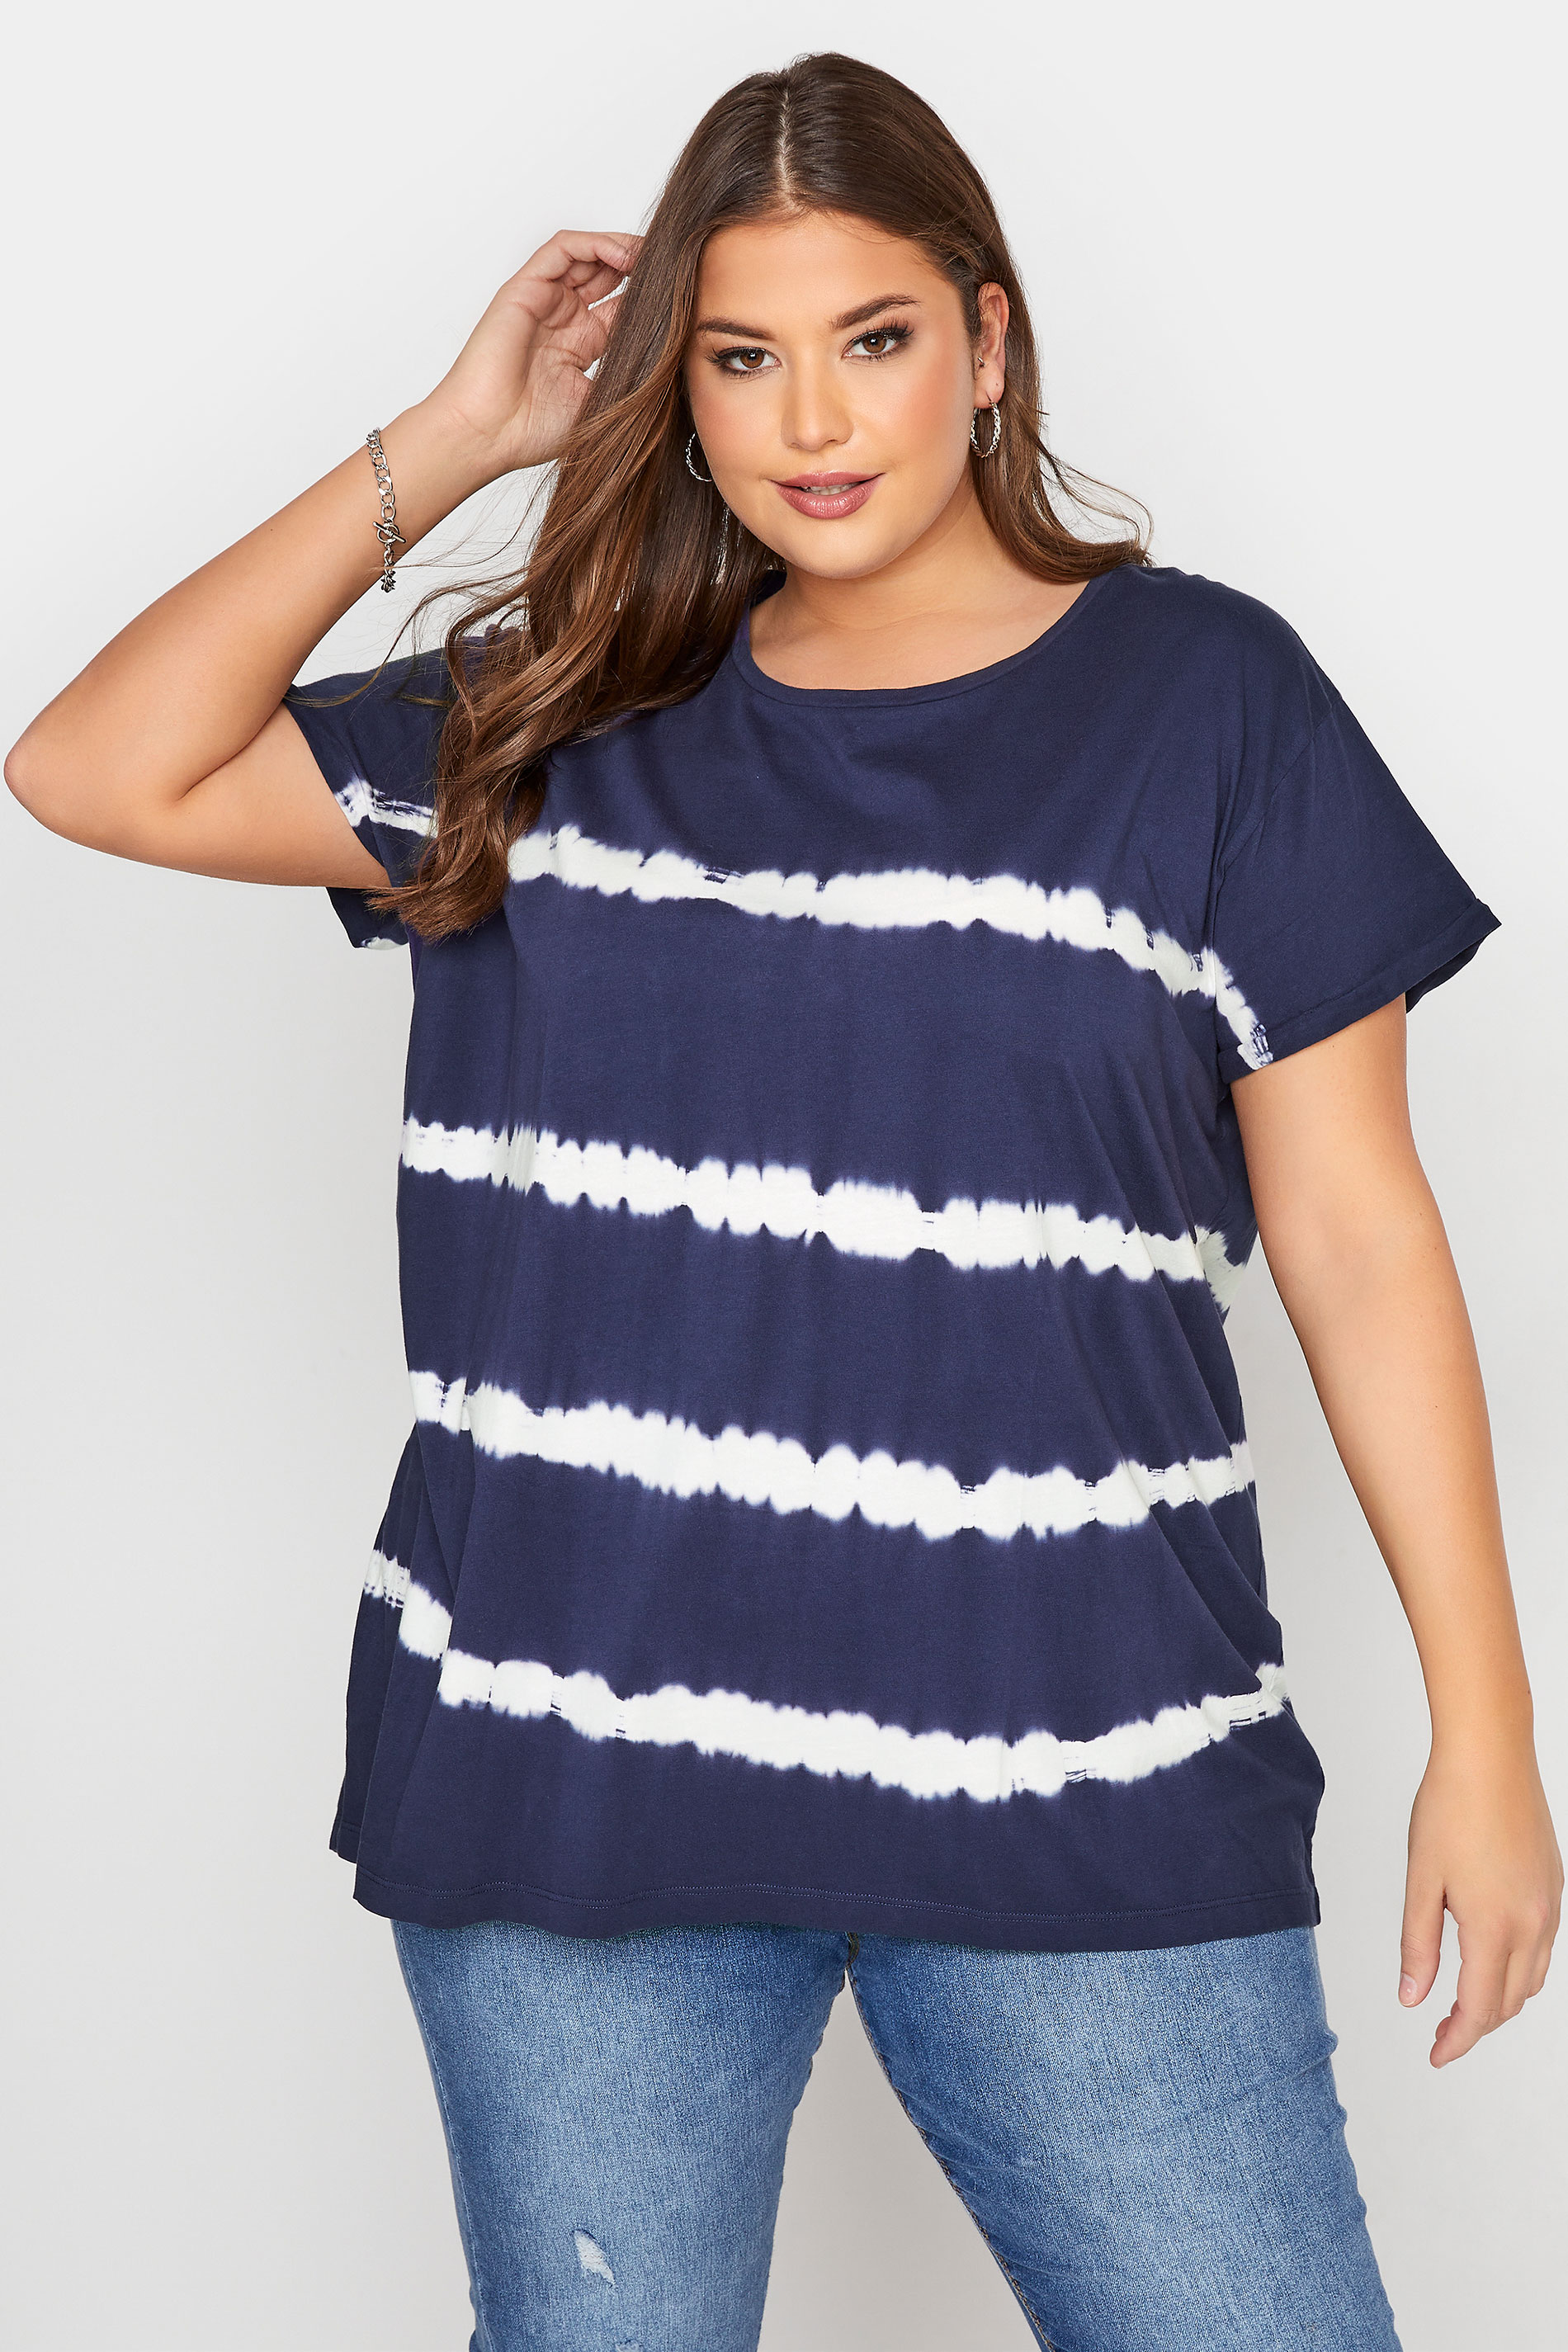 YOURS FOR GOOD Curve Navy Blue Tie Dye T-Shirt_A.jpg